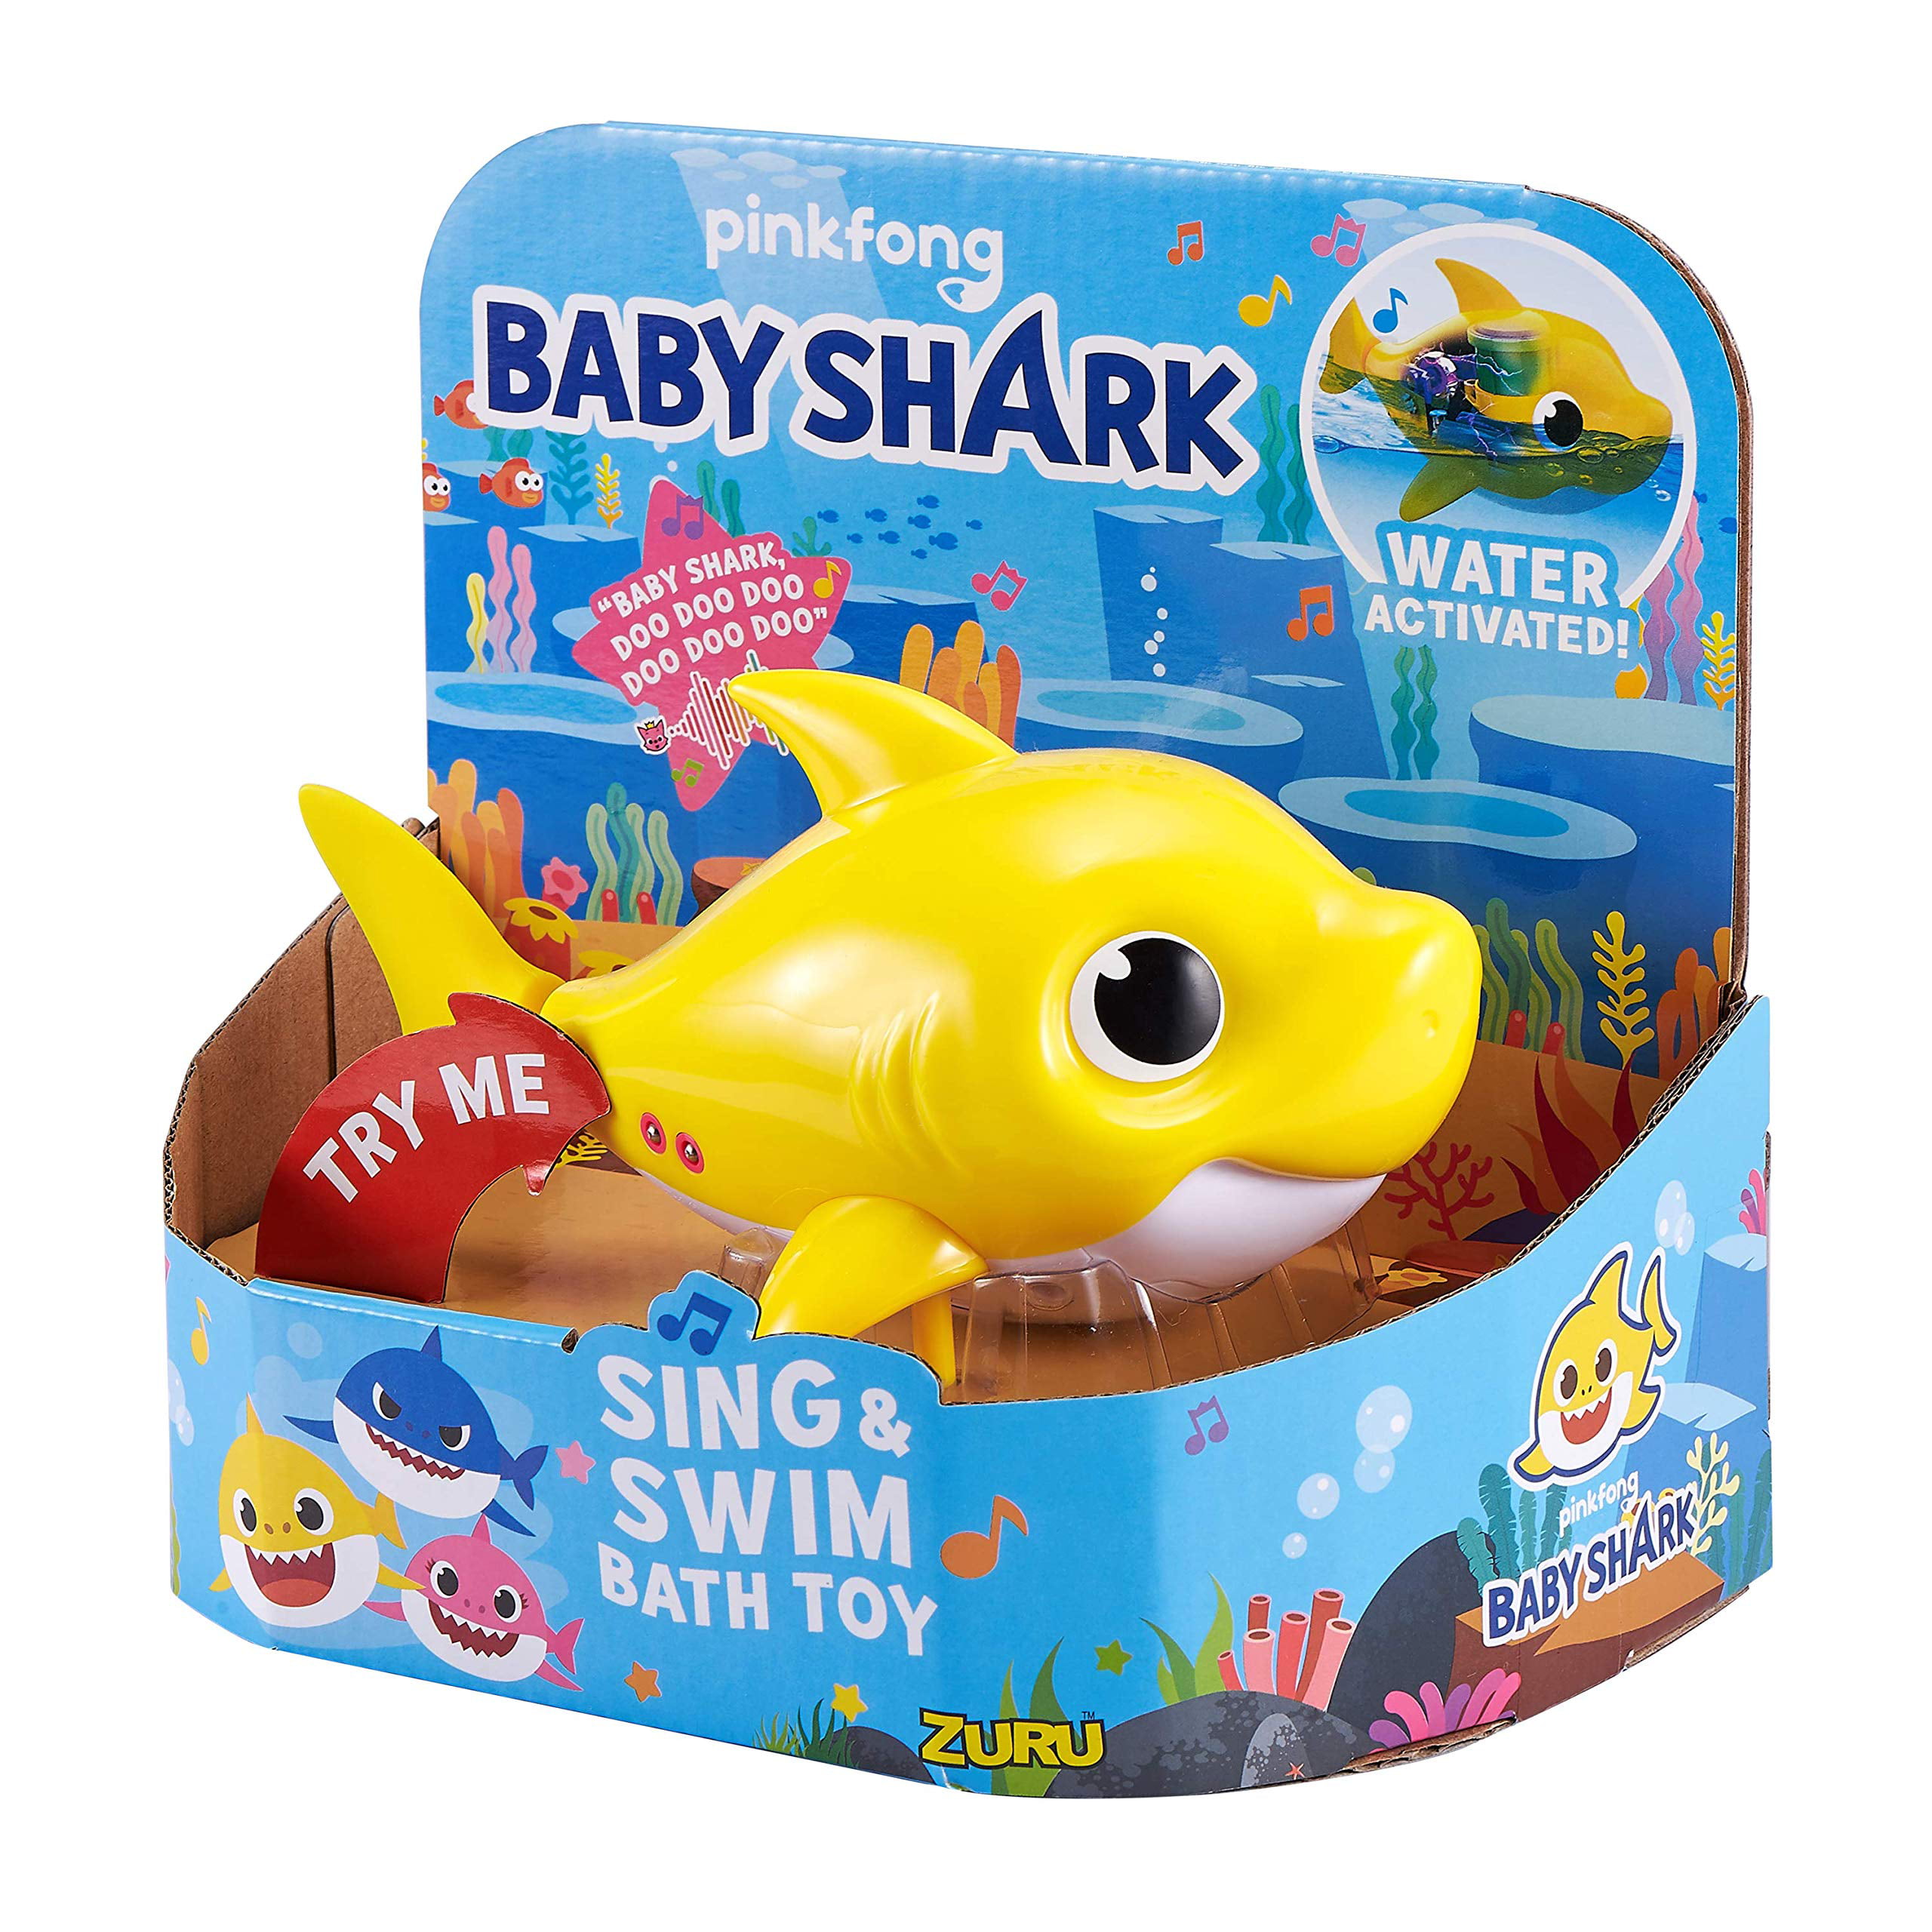 Robo Alive BABY SHARK Sing & Swim Bath TOY Water Activated PINK Pinkfong 